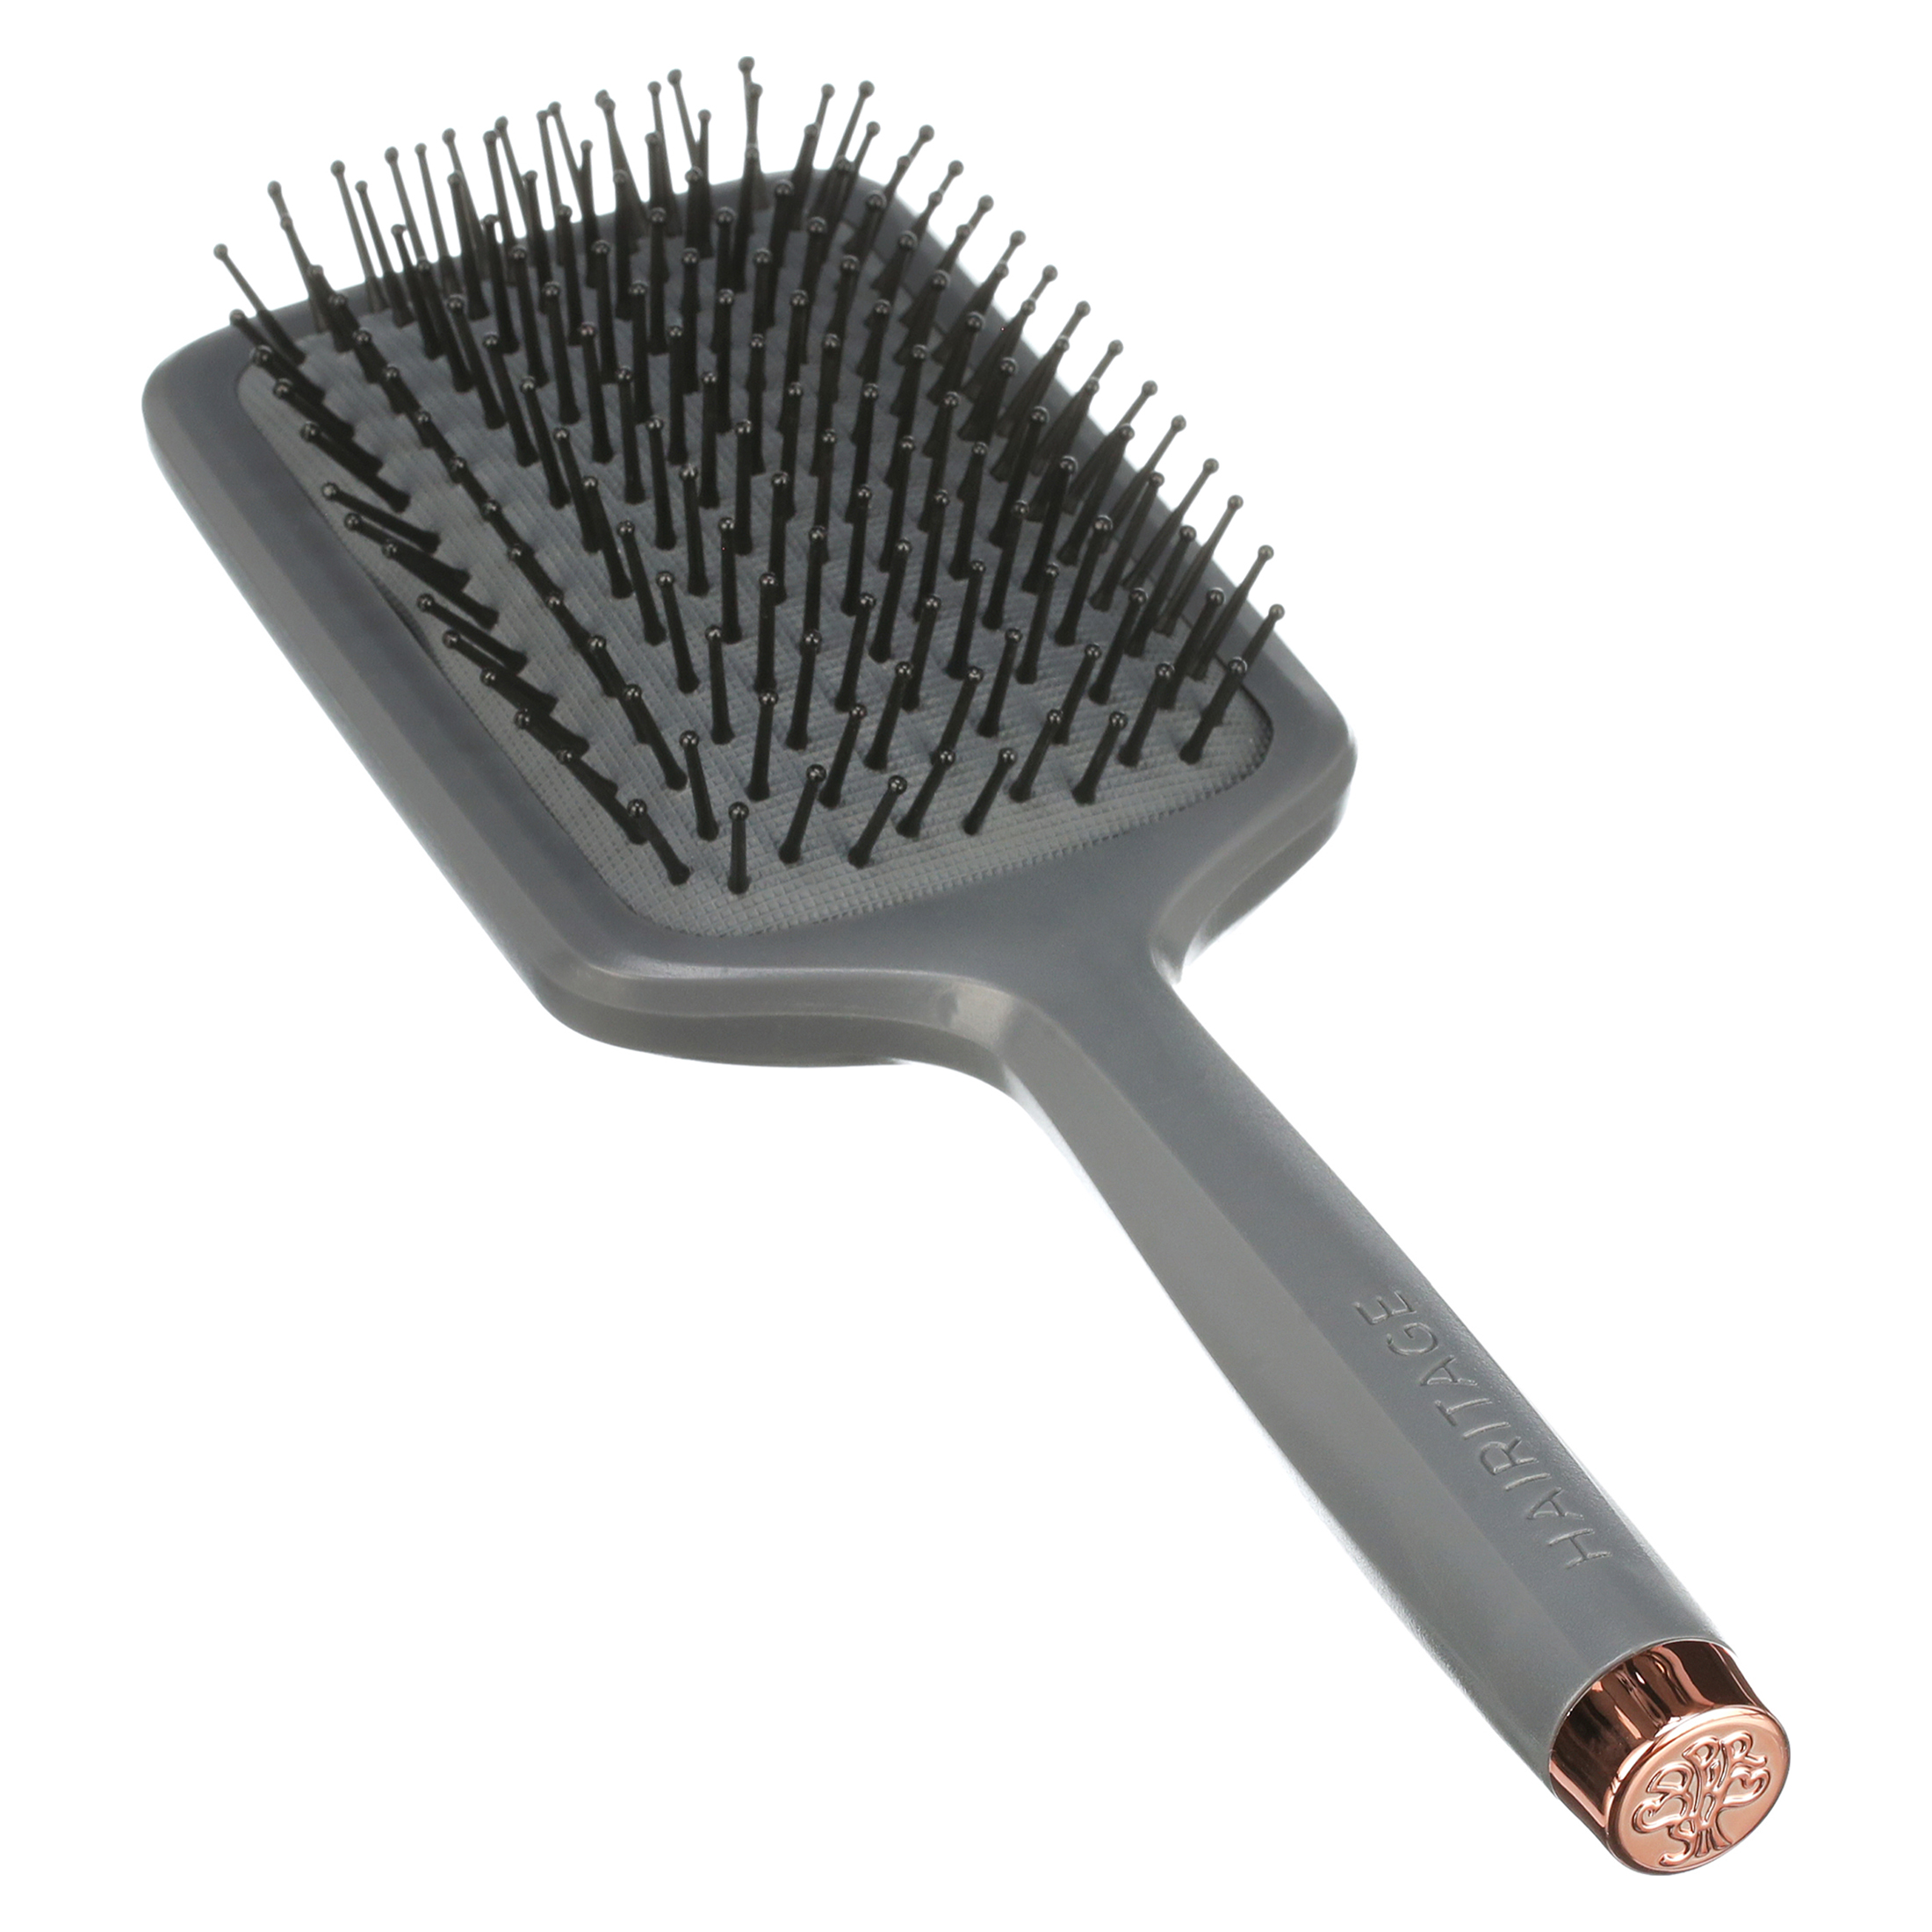 Hairitage Brush It Off Detangling & Smoothing Paddle Hair Brush for Women | Anti Frizz | for Wet & Dry Hair, 1 PC - image 12 of 12